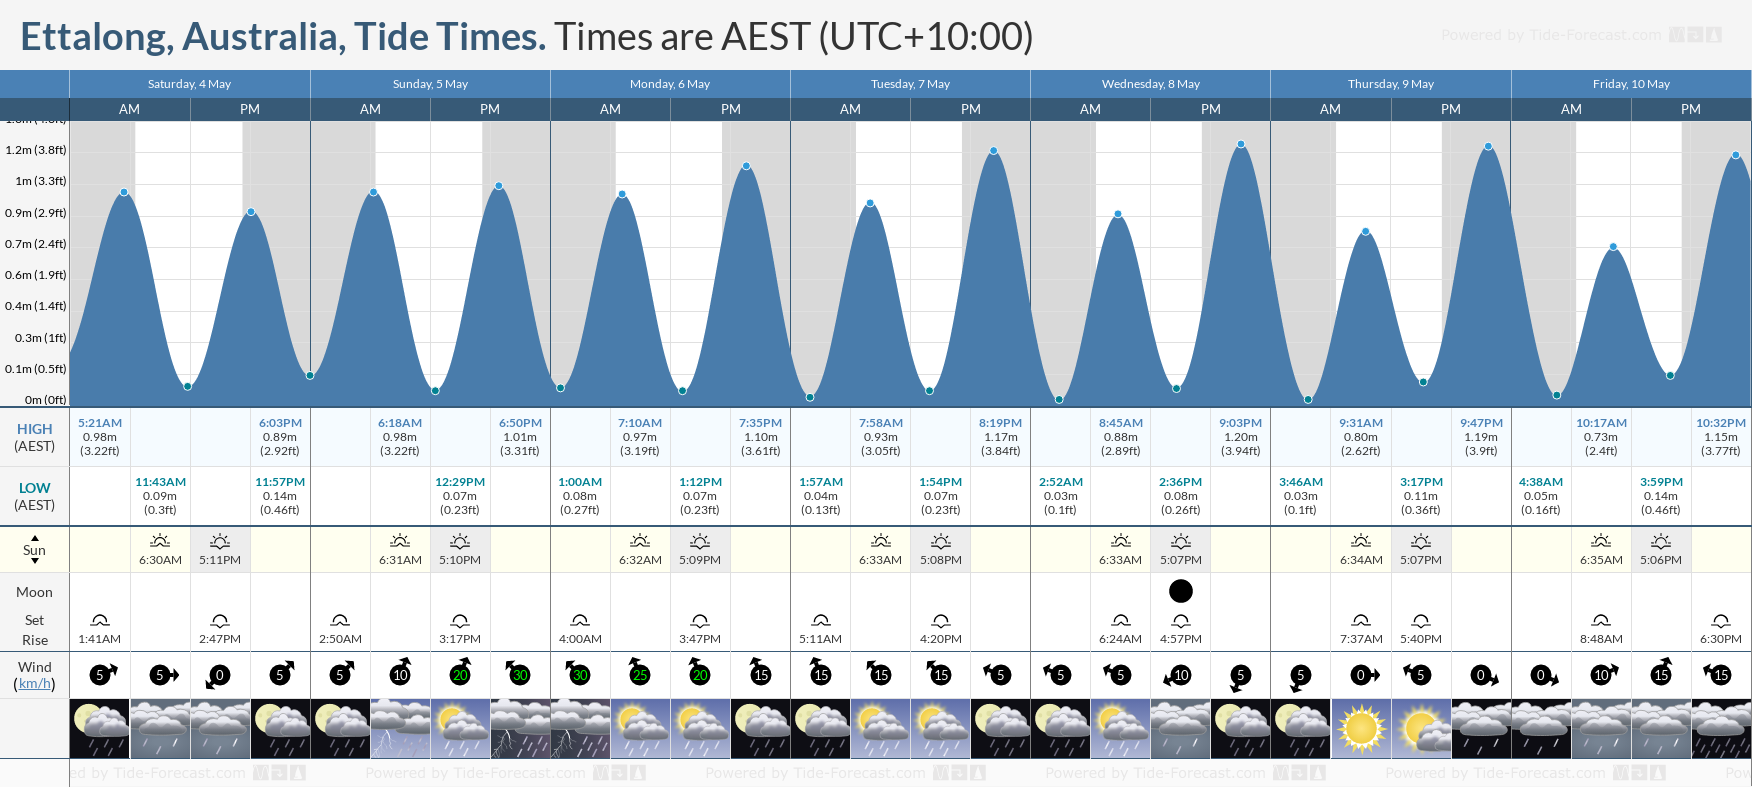 Ettalong, Australia Tide Chart including high and low tide tide times for the next 7 days